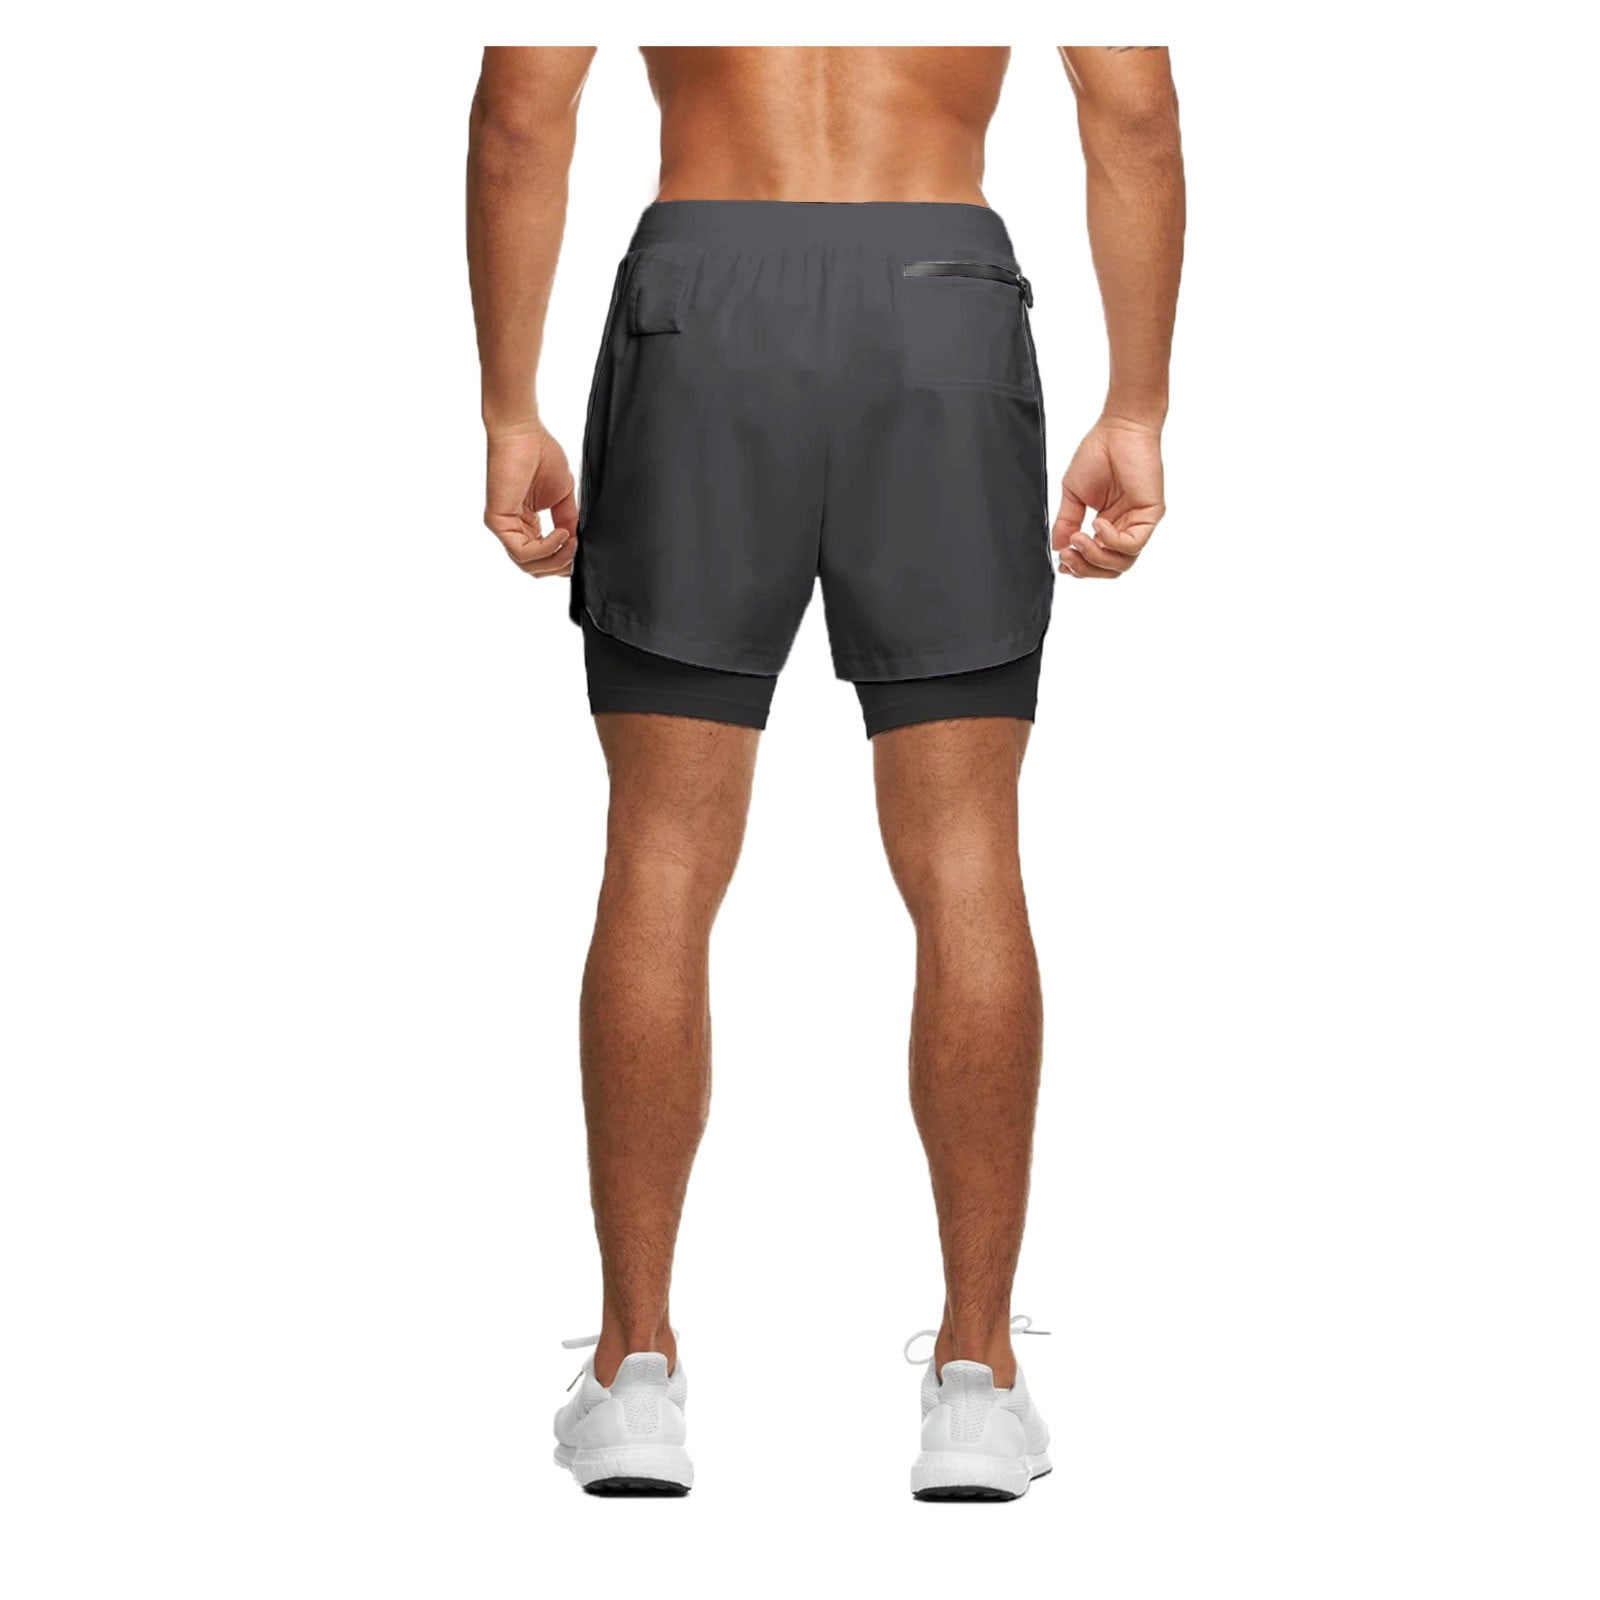 Men's 2 in 1 Workout Running Shorts Casual Quick Dry Lightweight ...